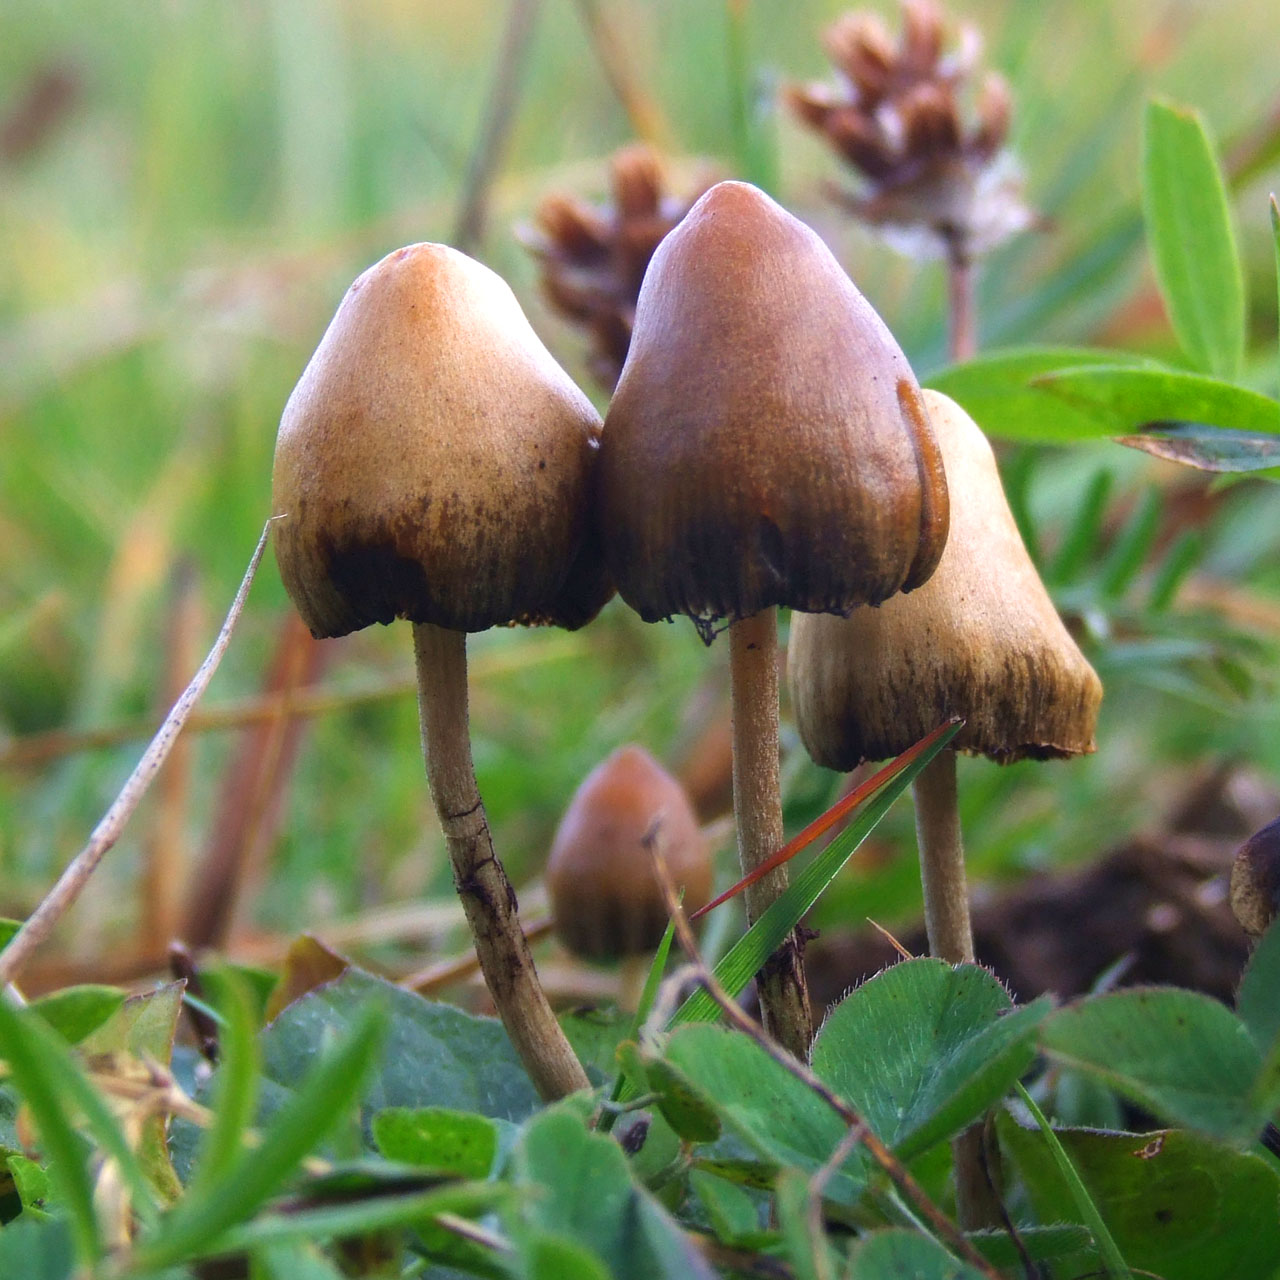 Rats on ‘magic mushrooms’ could help people with anorexia